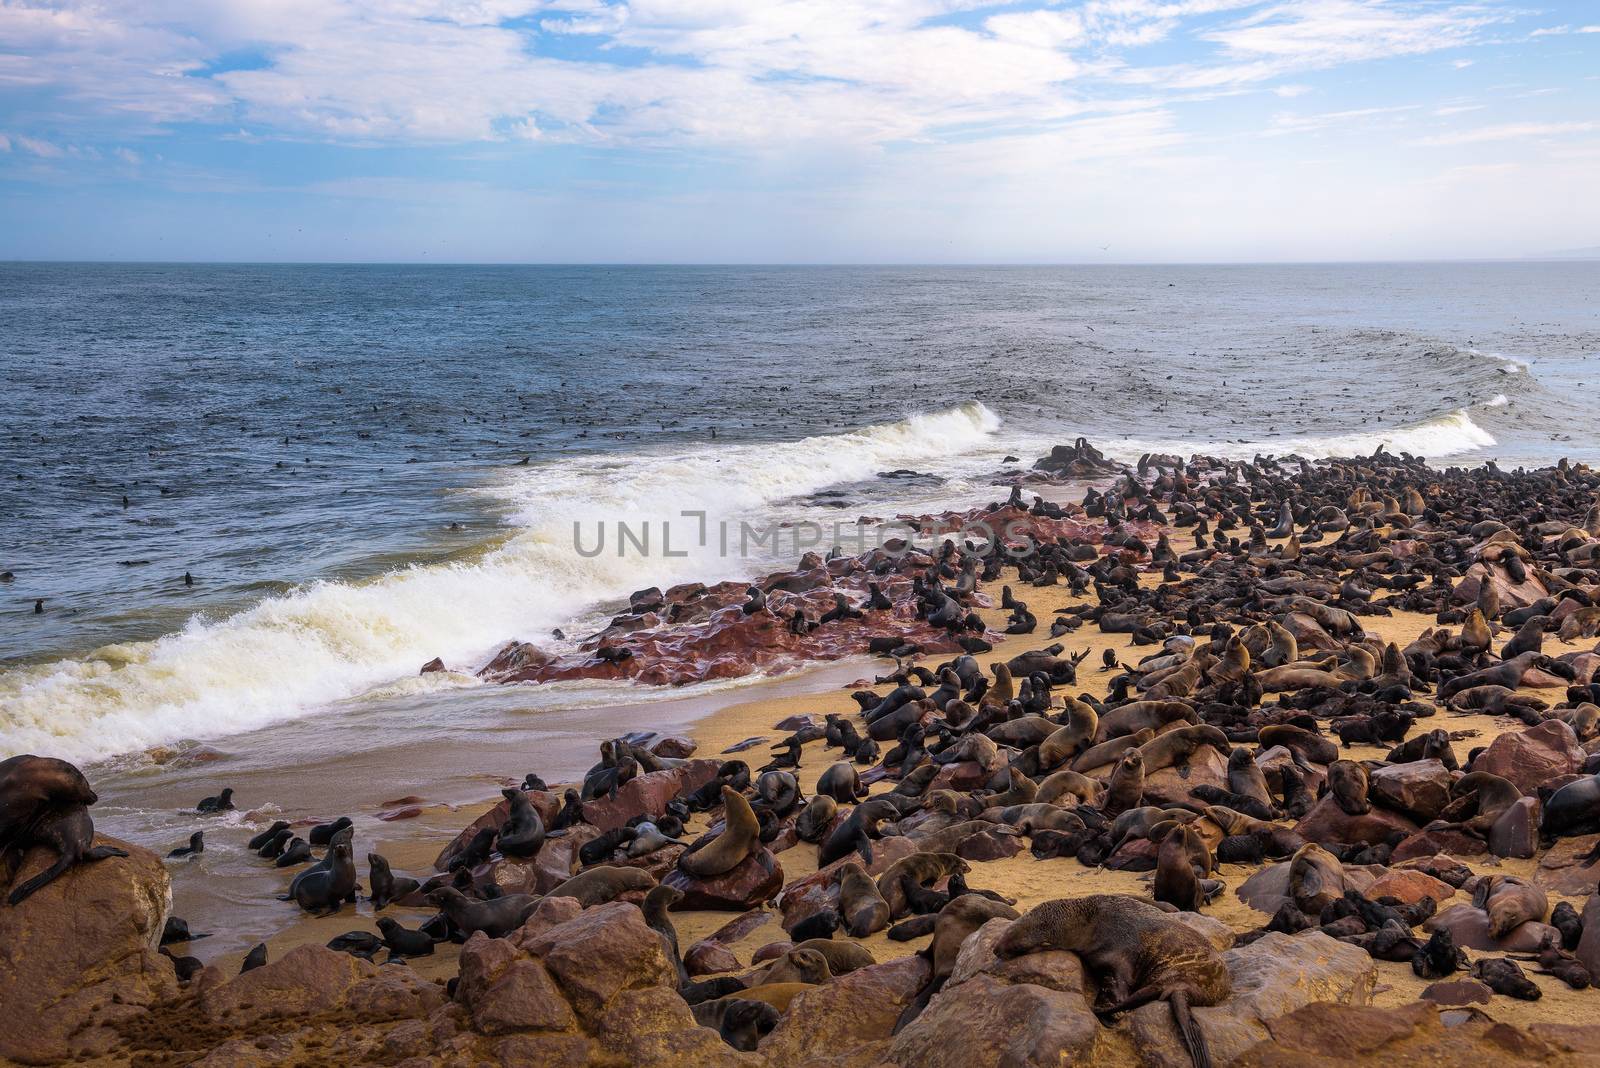 Seal fur colony at Cape Cross Seal Reserve, Namibia. by nickfox